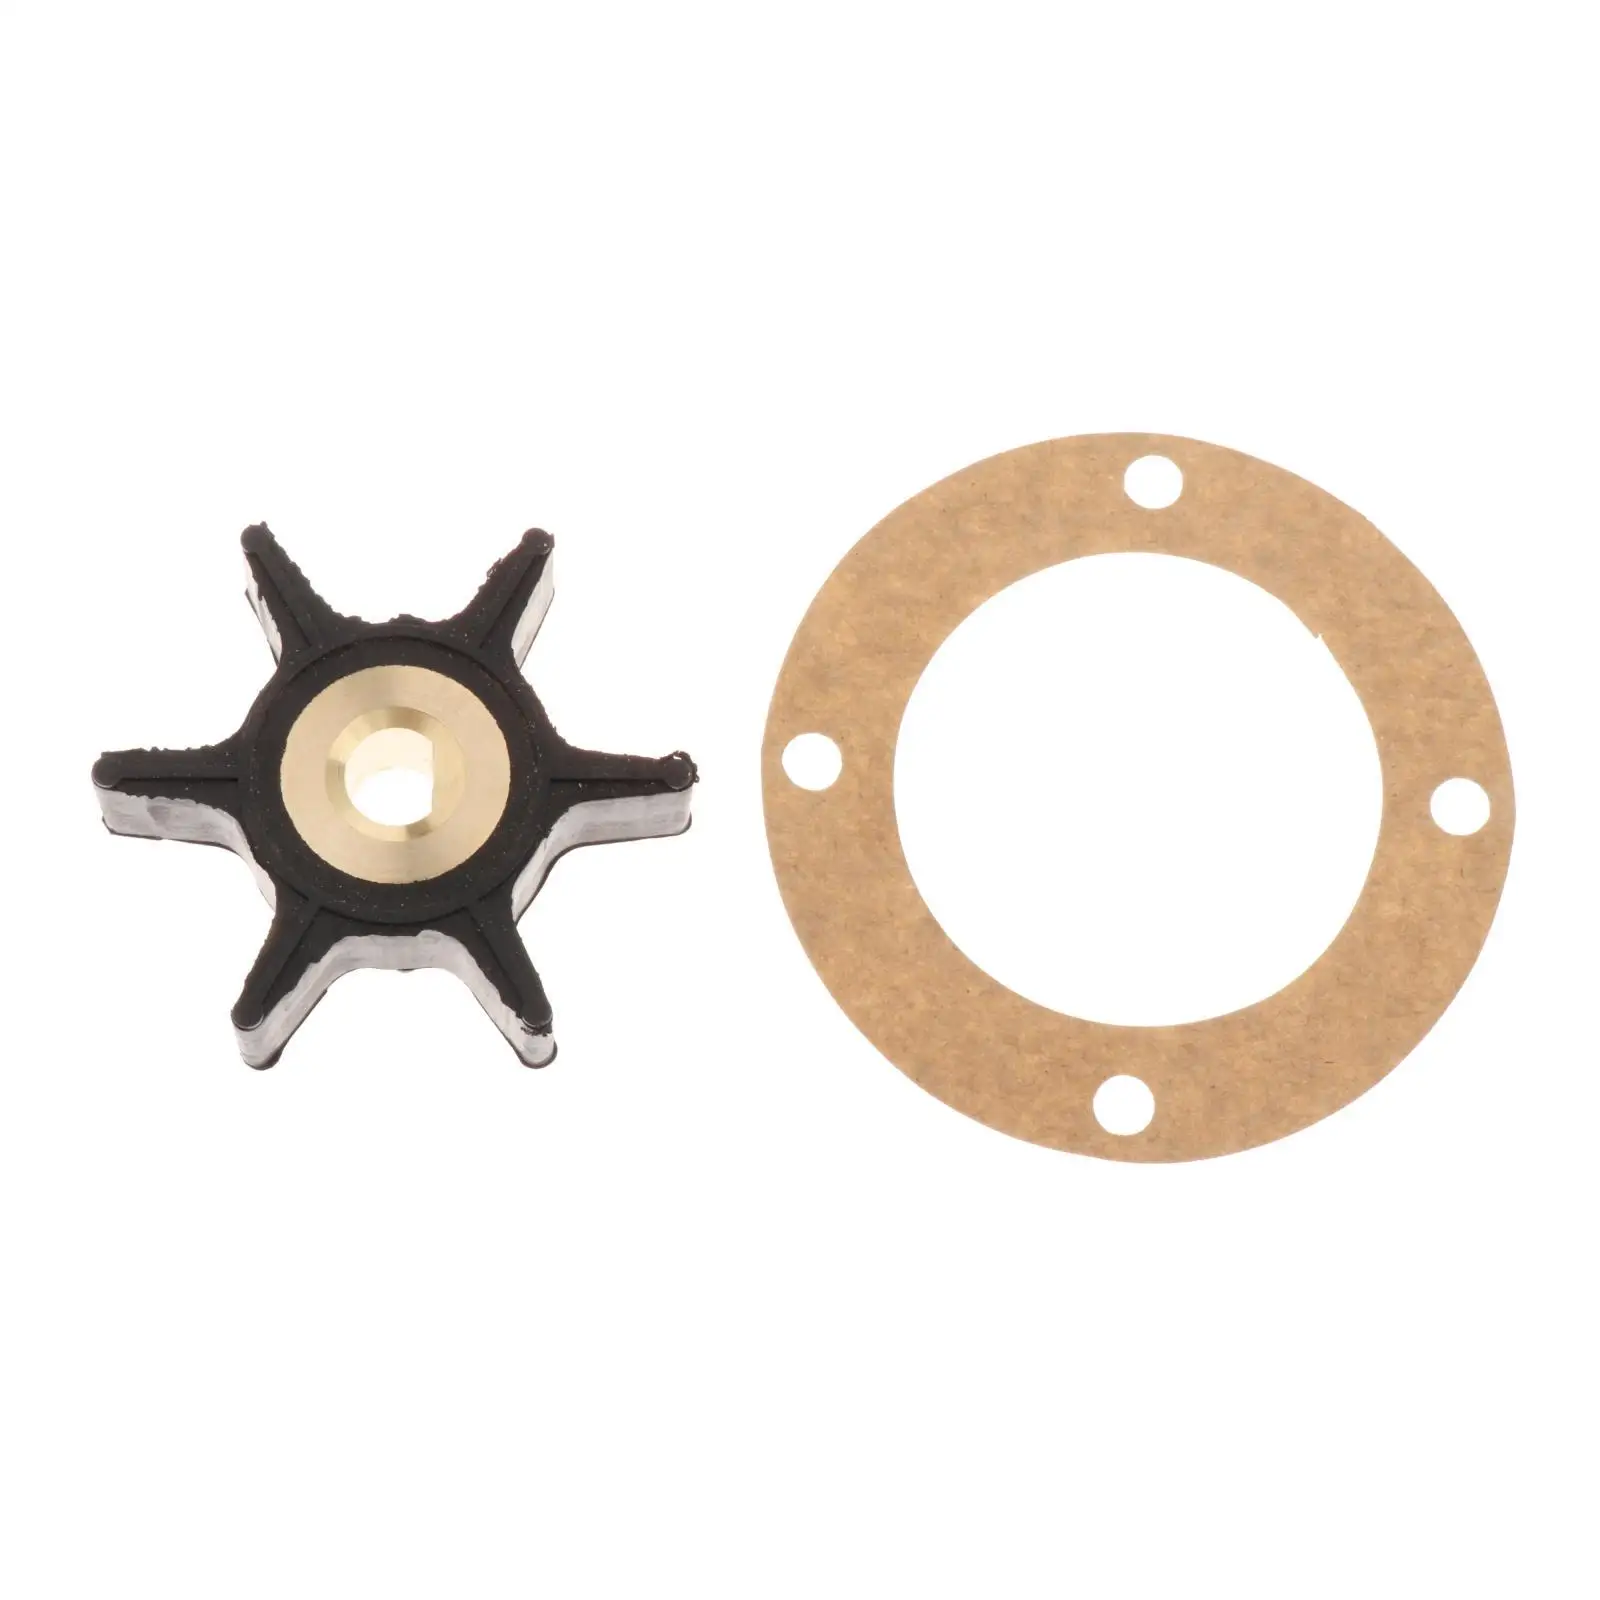 2Pcs Impeller and 4-Hole Gasket Kit for Onan 131-0386 170-3172 131-0257 Pump